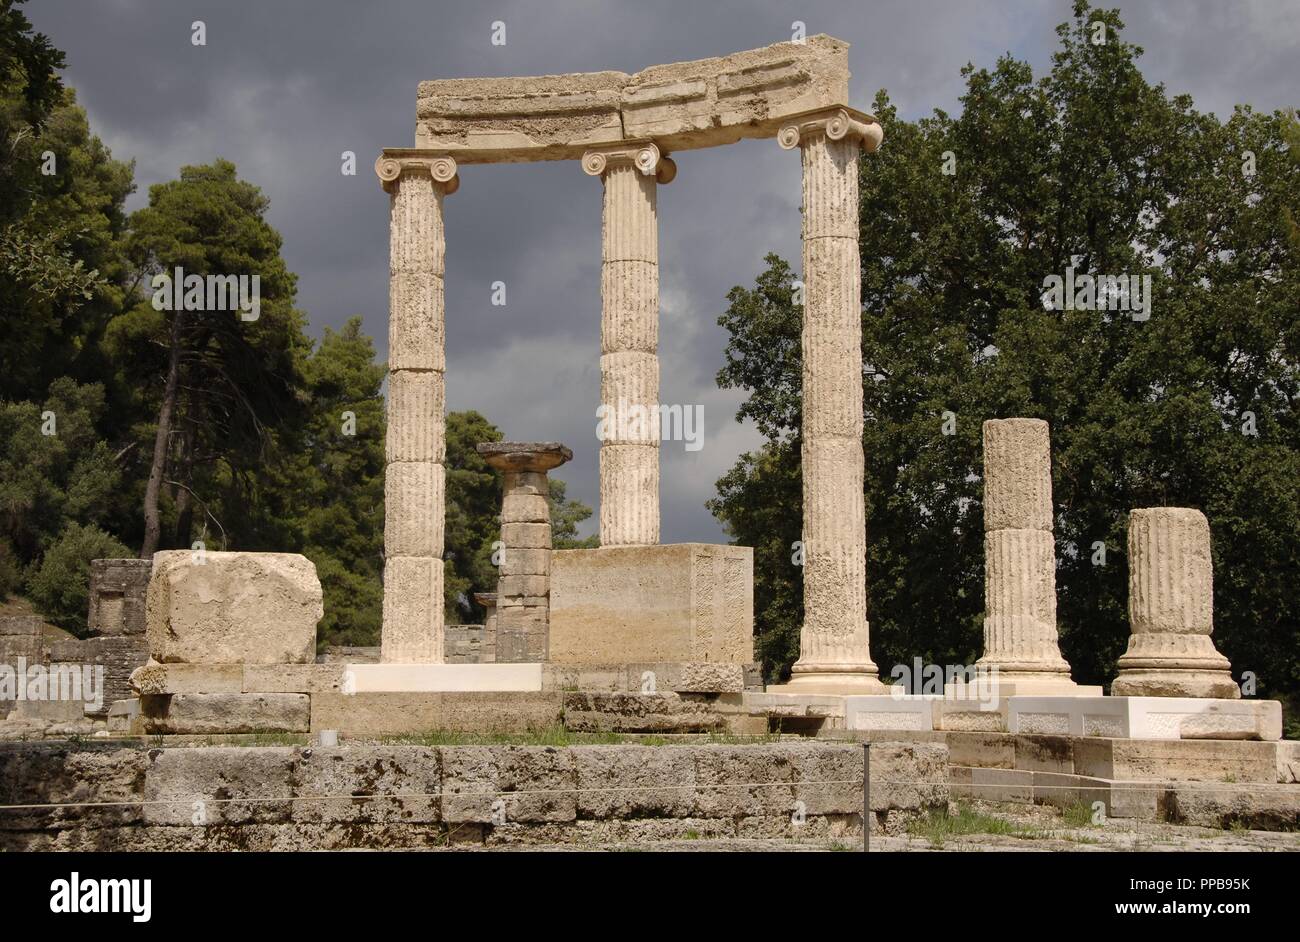 Greece, Olympia. The Philippeion. Circular memorial of Philip of Macedon.  Marble and limestone. It was built to conmemorate the Philip's victory at  Battle of Chaeronea, 338 BC. Peloponnese Stock Photo - Alamy